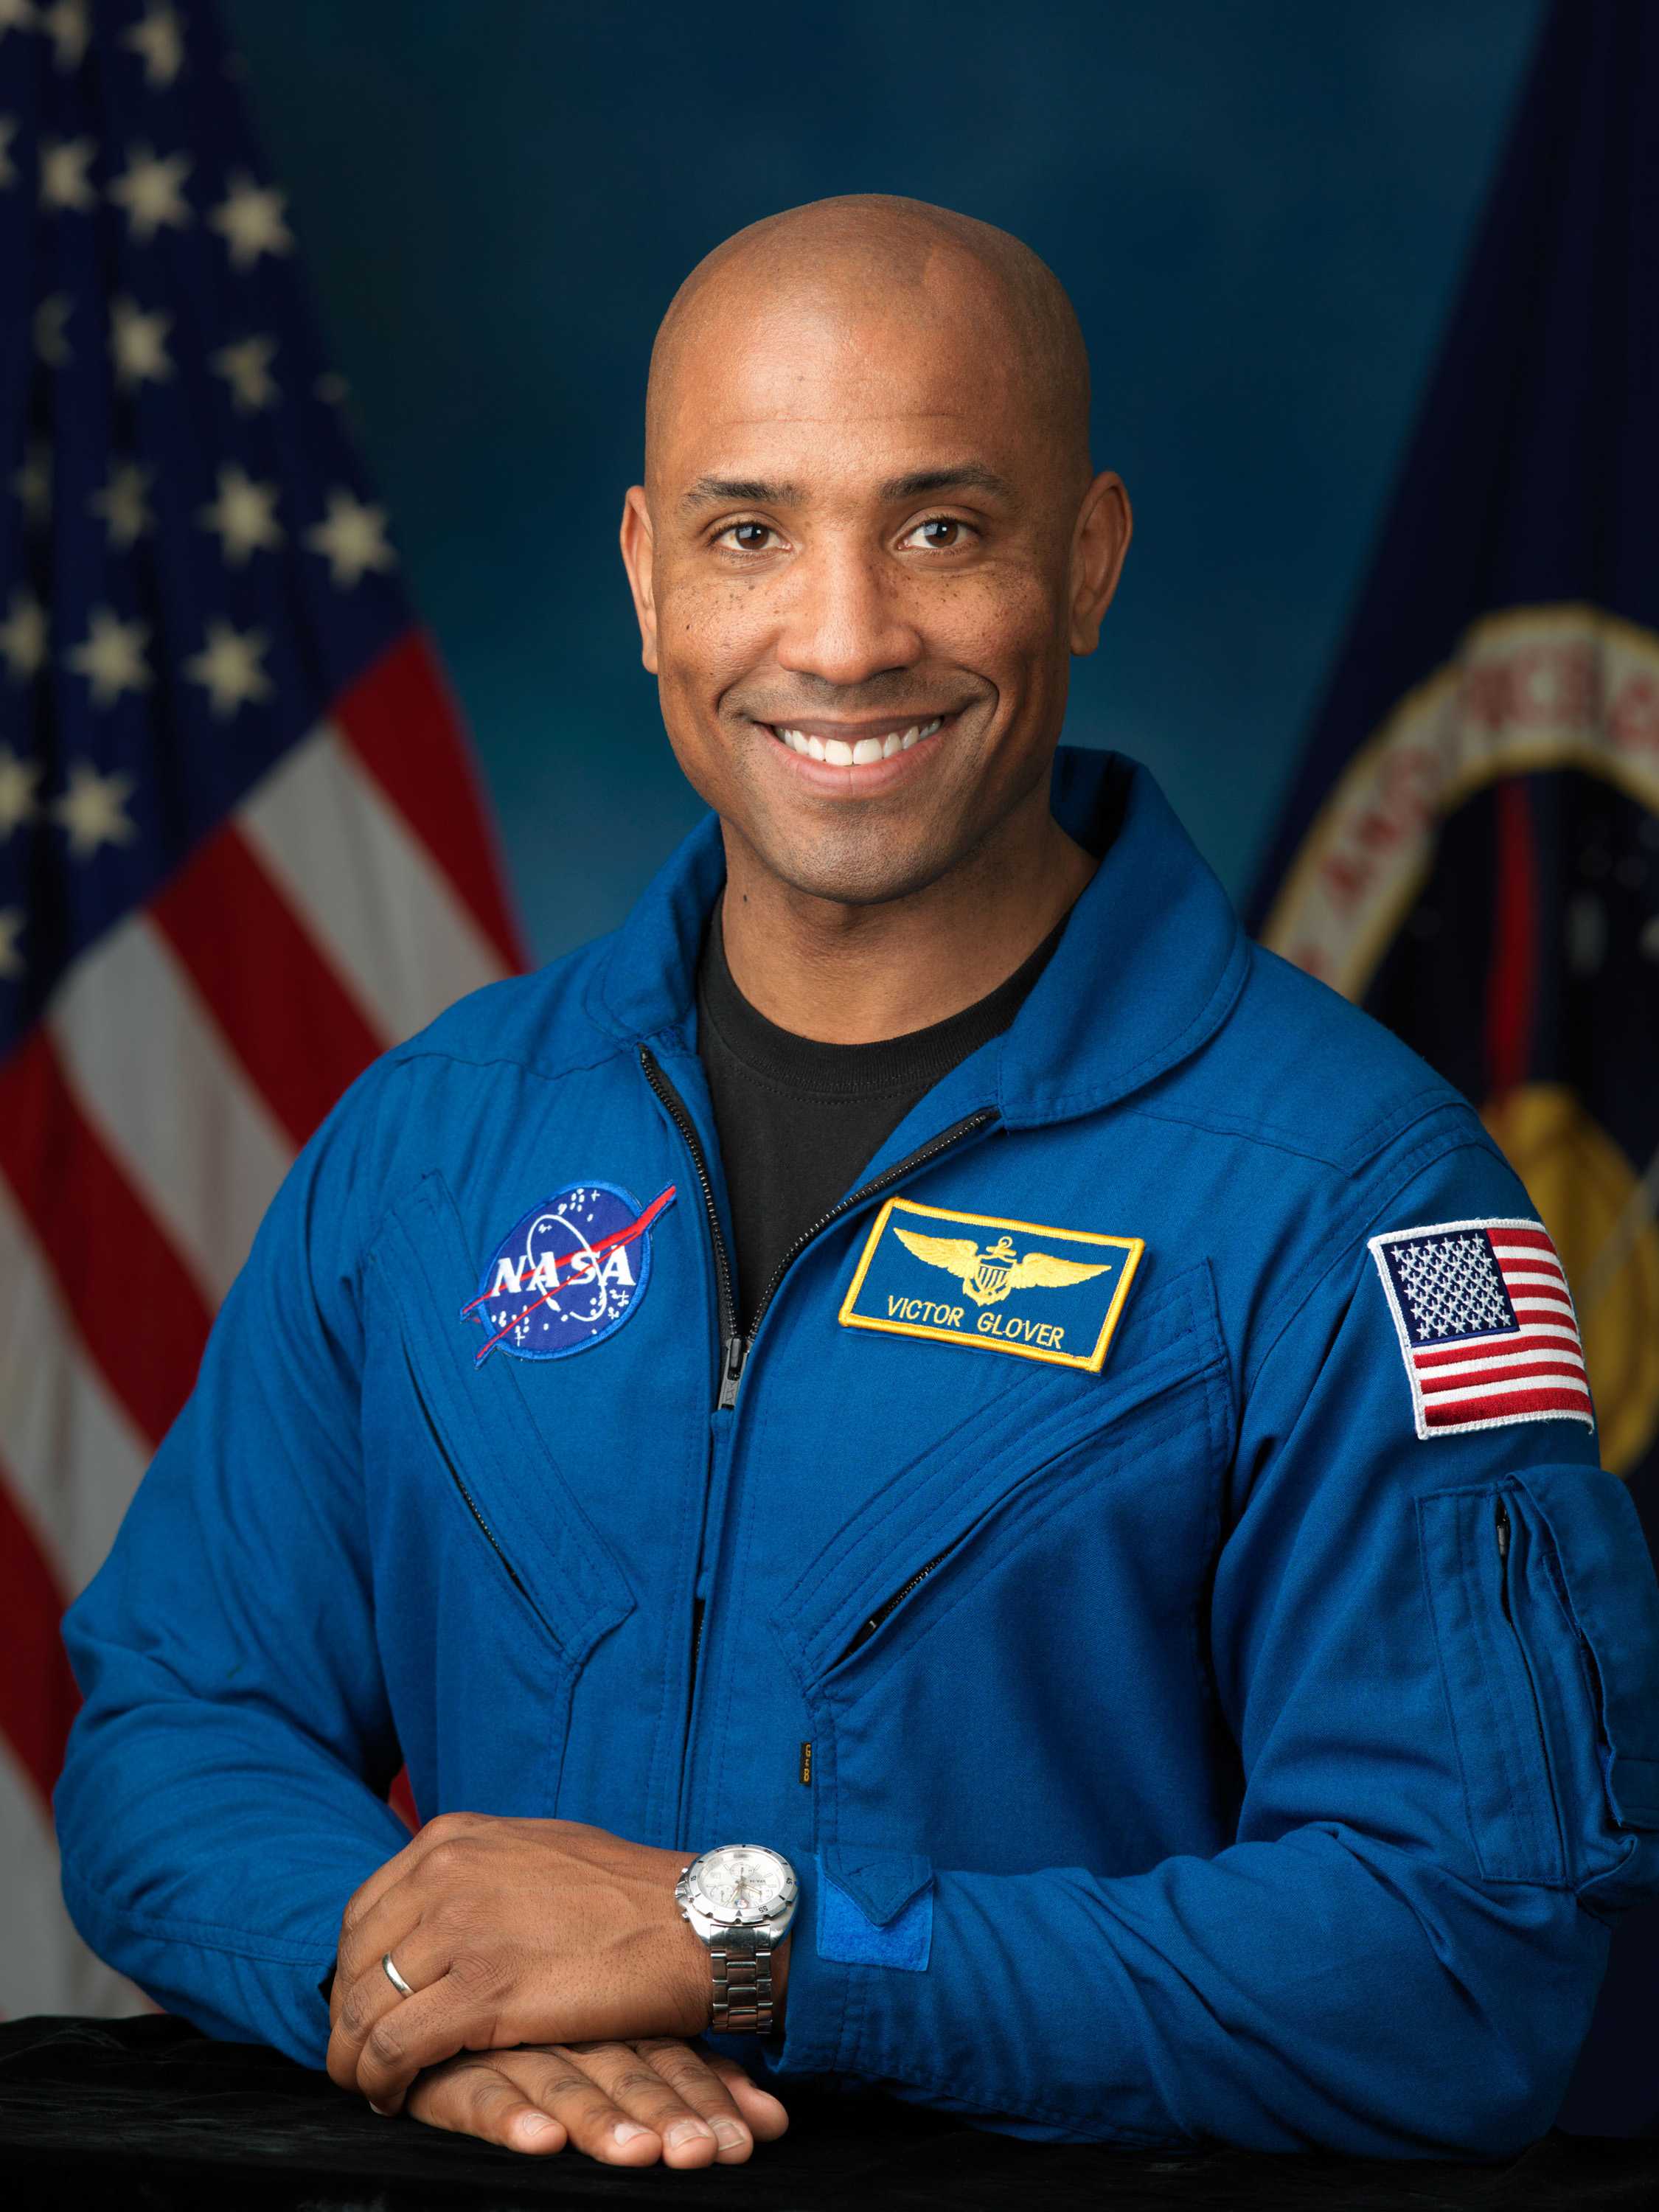 Victor Glover is smiling while he poses for a portrait in a blue NASA suit with his hands crossed.